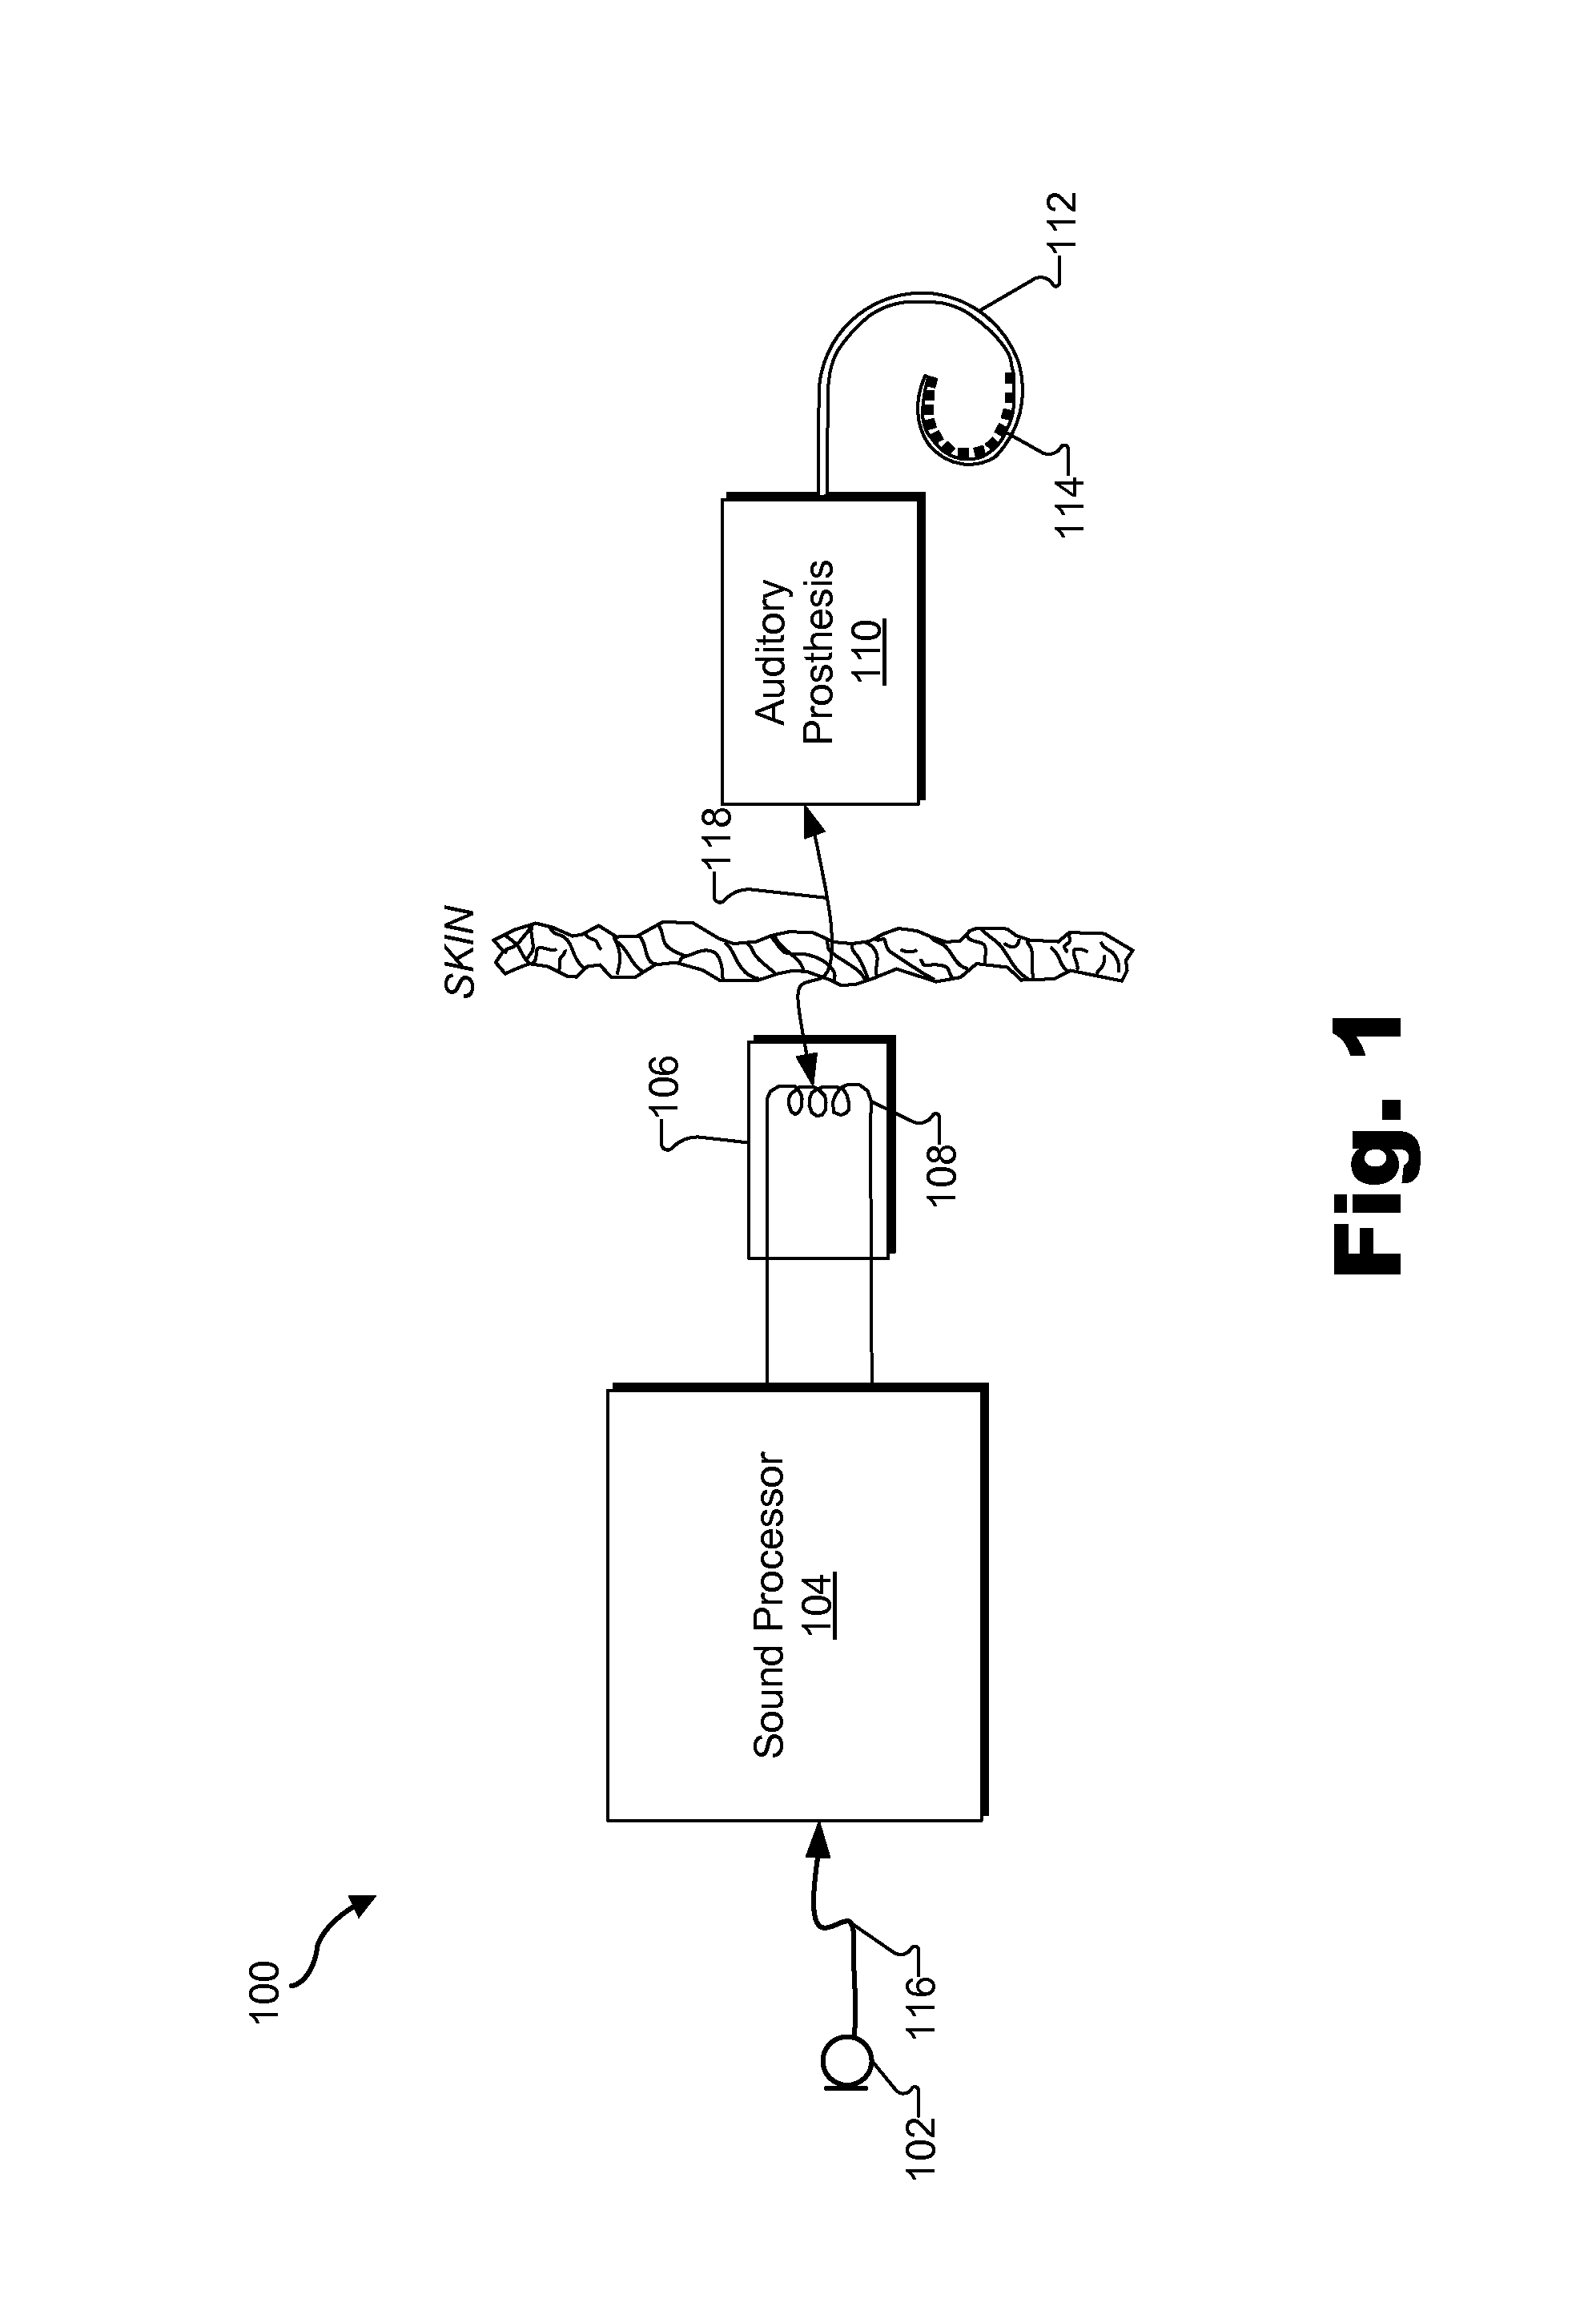 Systems and methods for facilitating time-based fitting by a sound processor